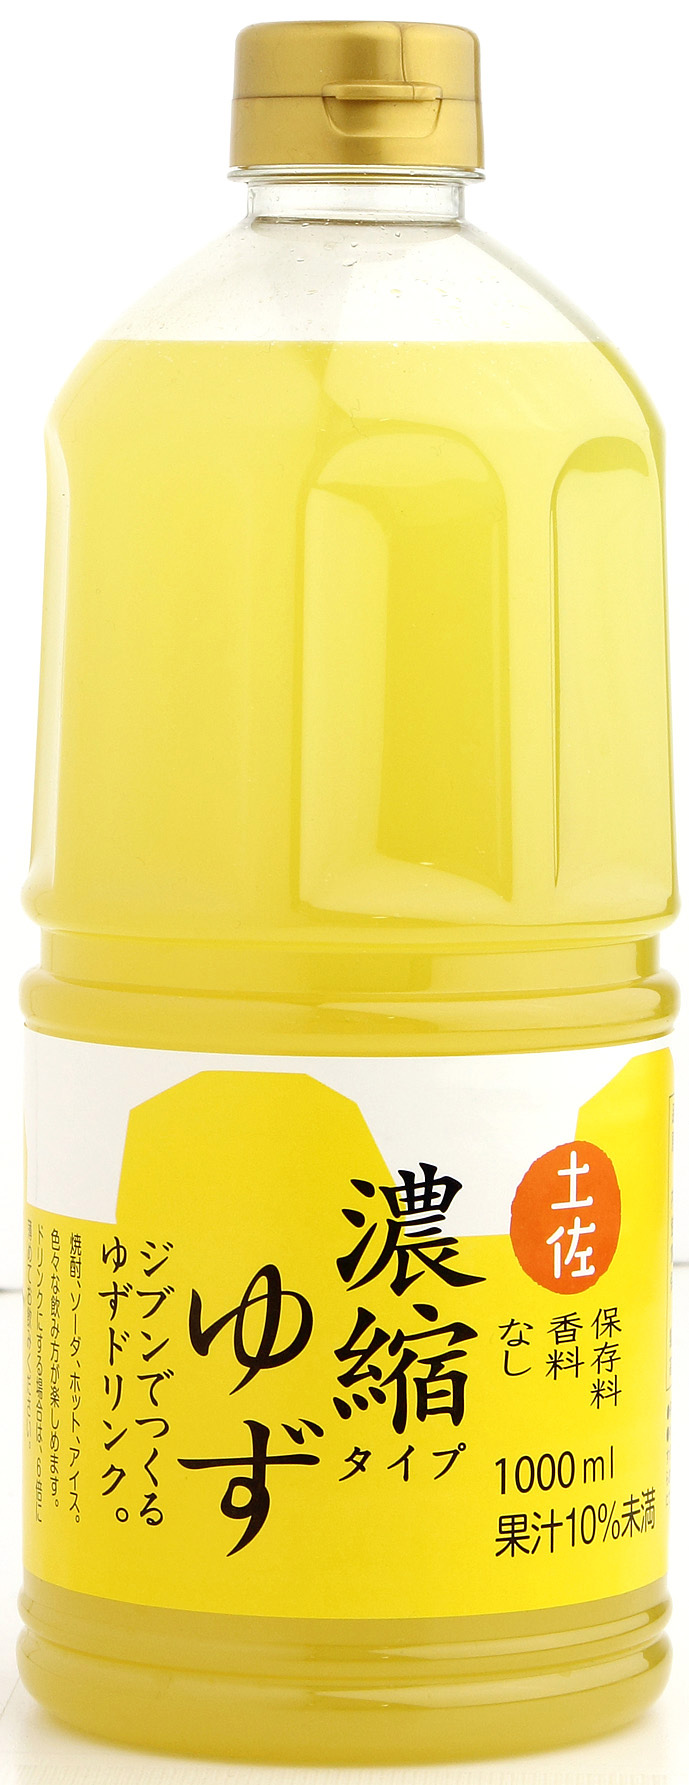 Concentrated Yuzu Drink